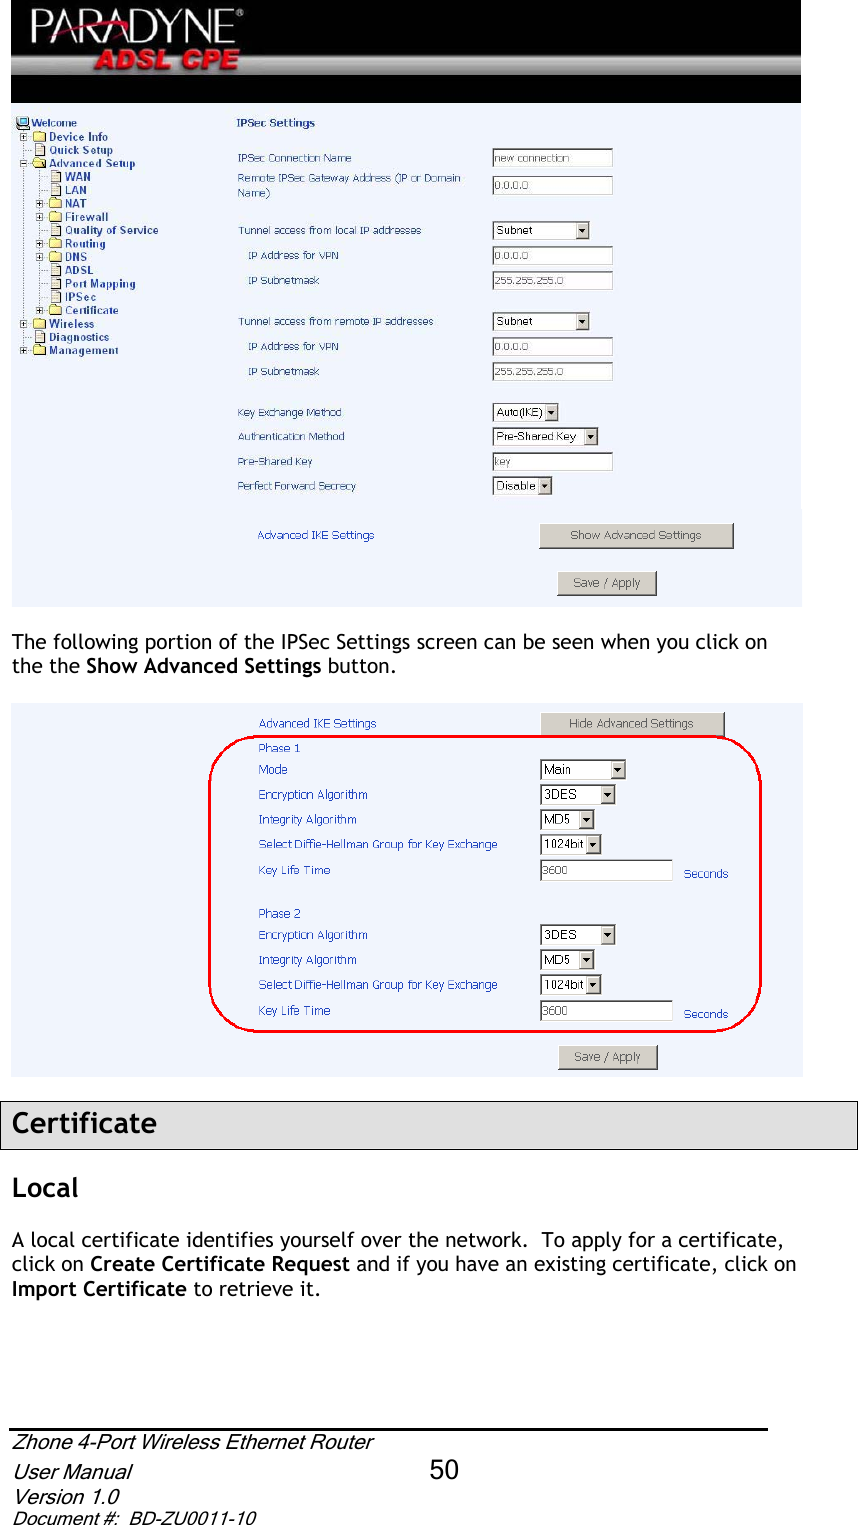 The following portion of the IPSec Settings screen can be seen when you click on the the Show Advanced Settings button.CertificateLocalA local certificate identifies yourself over the network.  To apply for a certificate, click on Create Certificate Request and if you have an existing certificate, click on Import Certificate to retrieve it. Zhone 4-Port Wireless Ethernet Router User Manual 50Version 1.0 Document #:  BD-ZU0011-10